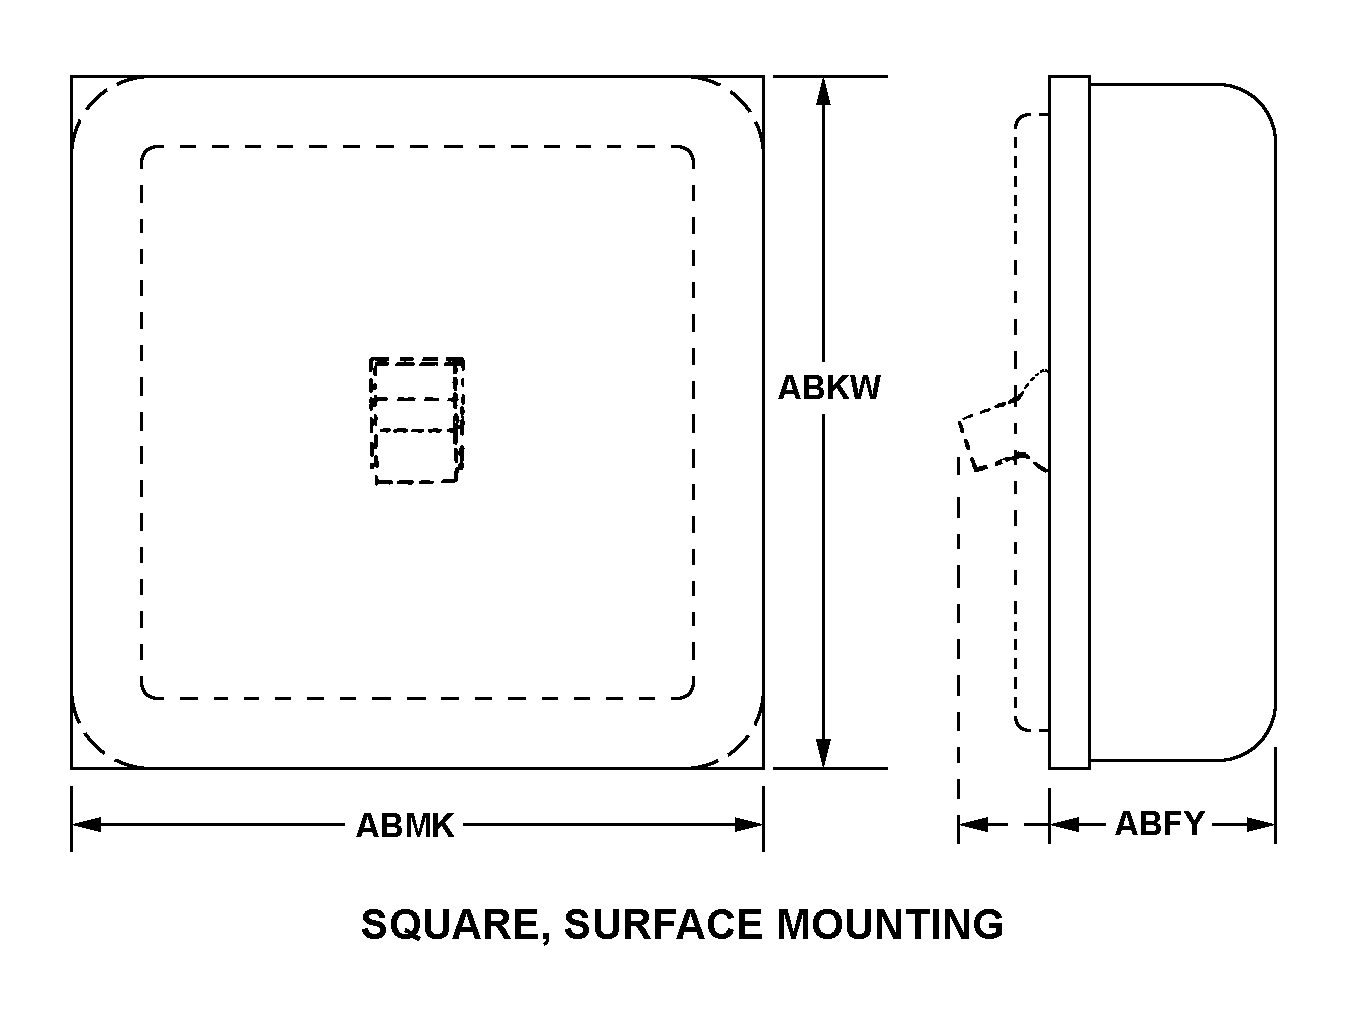 SQUARE, SURFACE MOUNTING style nsn 5935-01-512-0863